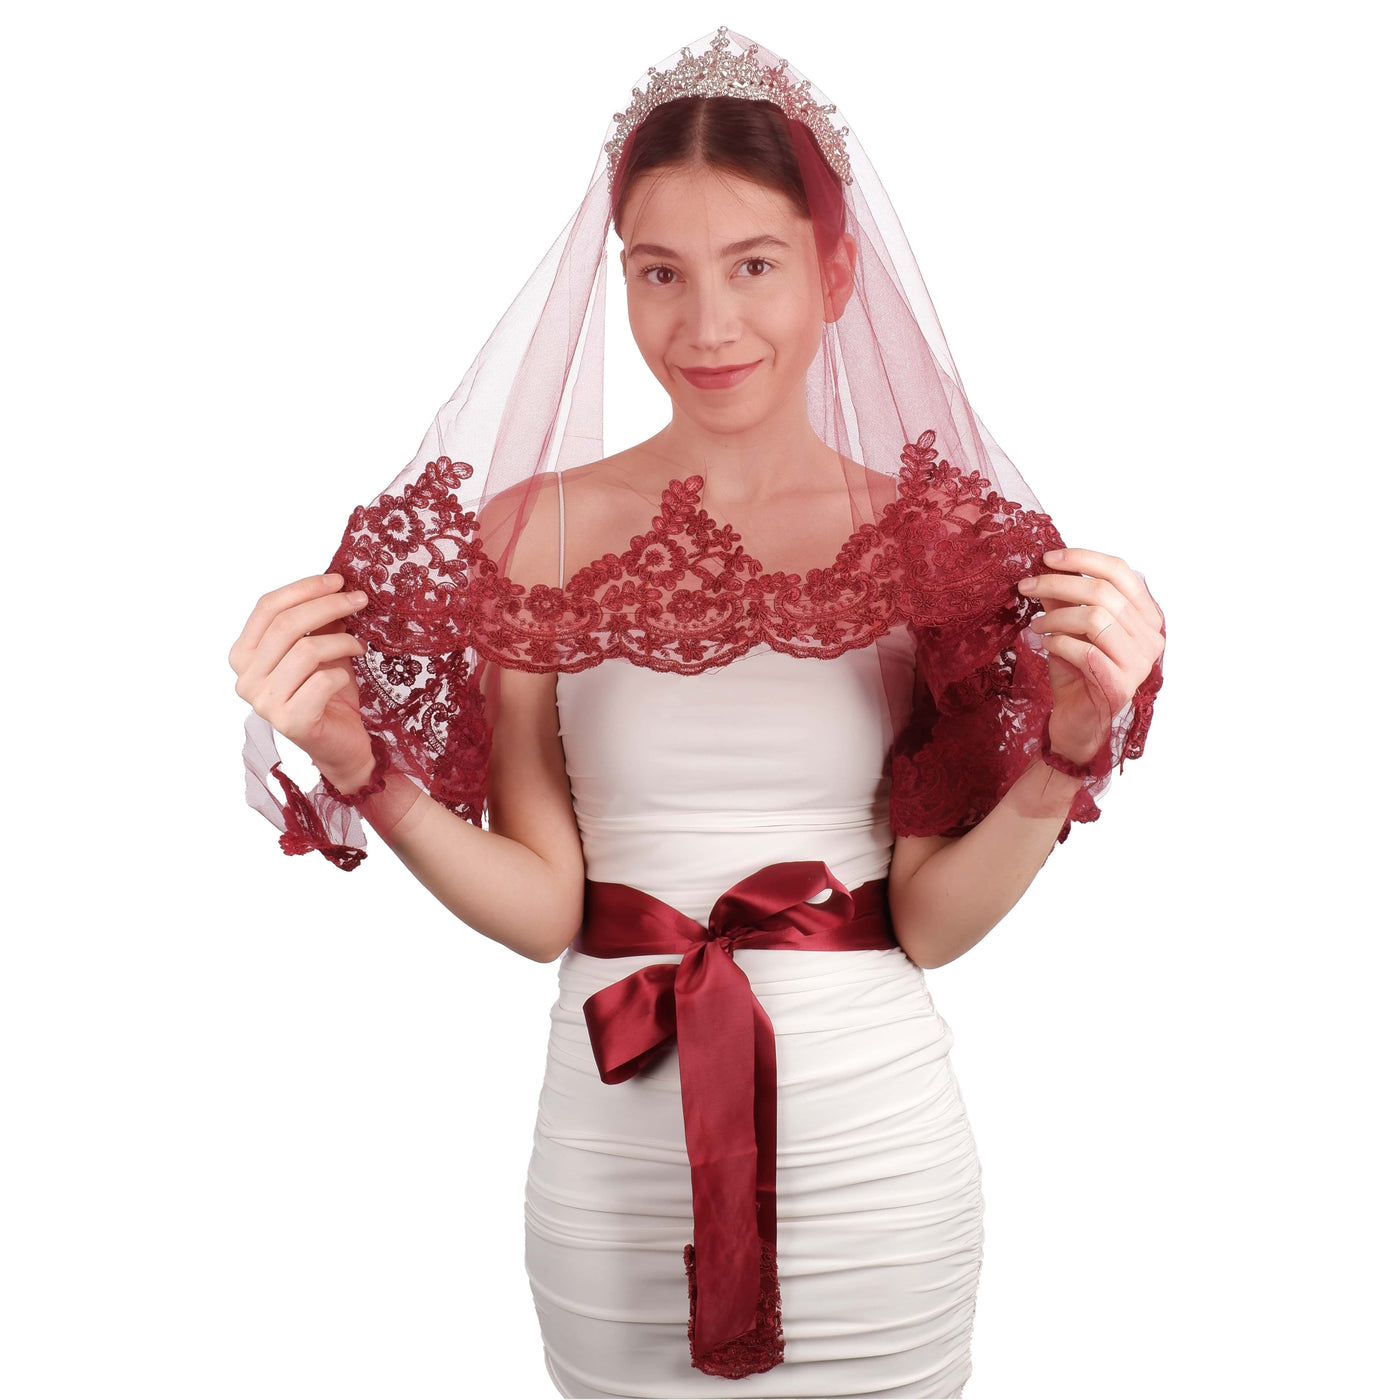 Lace Embroidered Bridal Veil Face Cover Special for Brides for Henna Night Face Cover Red